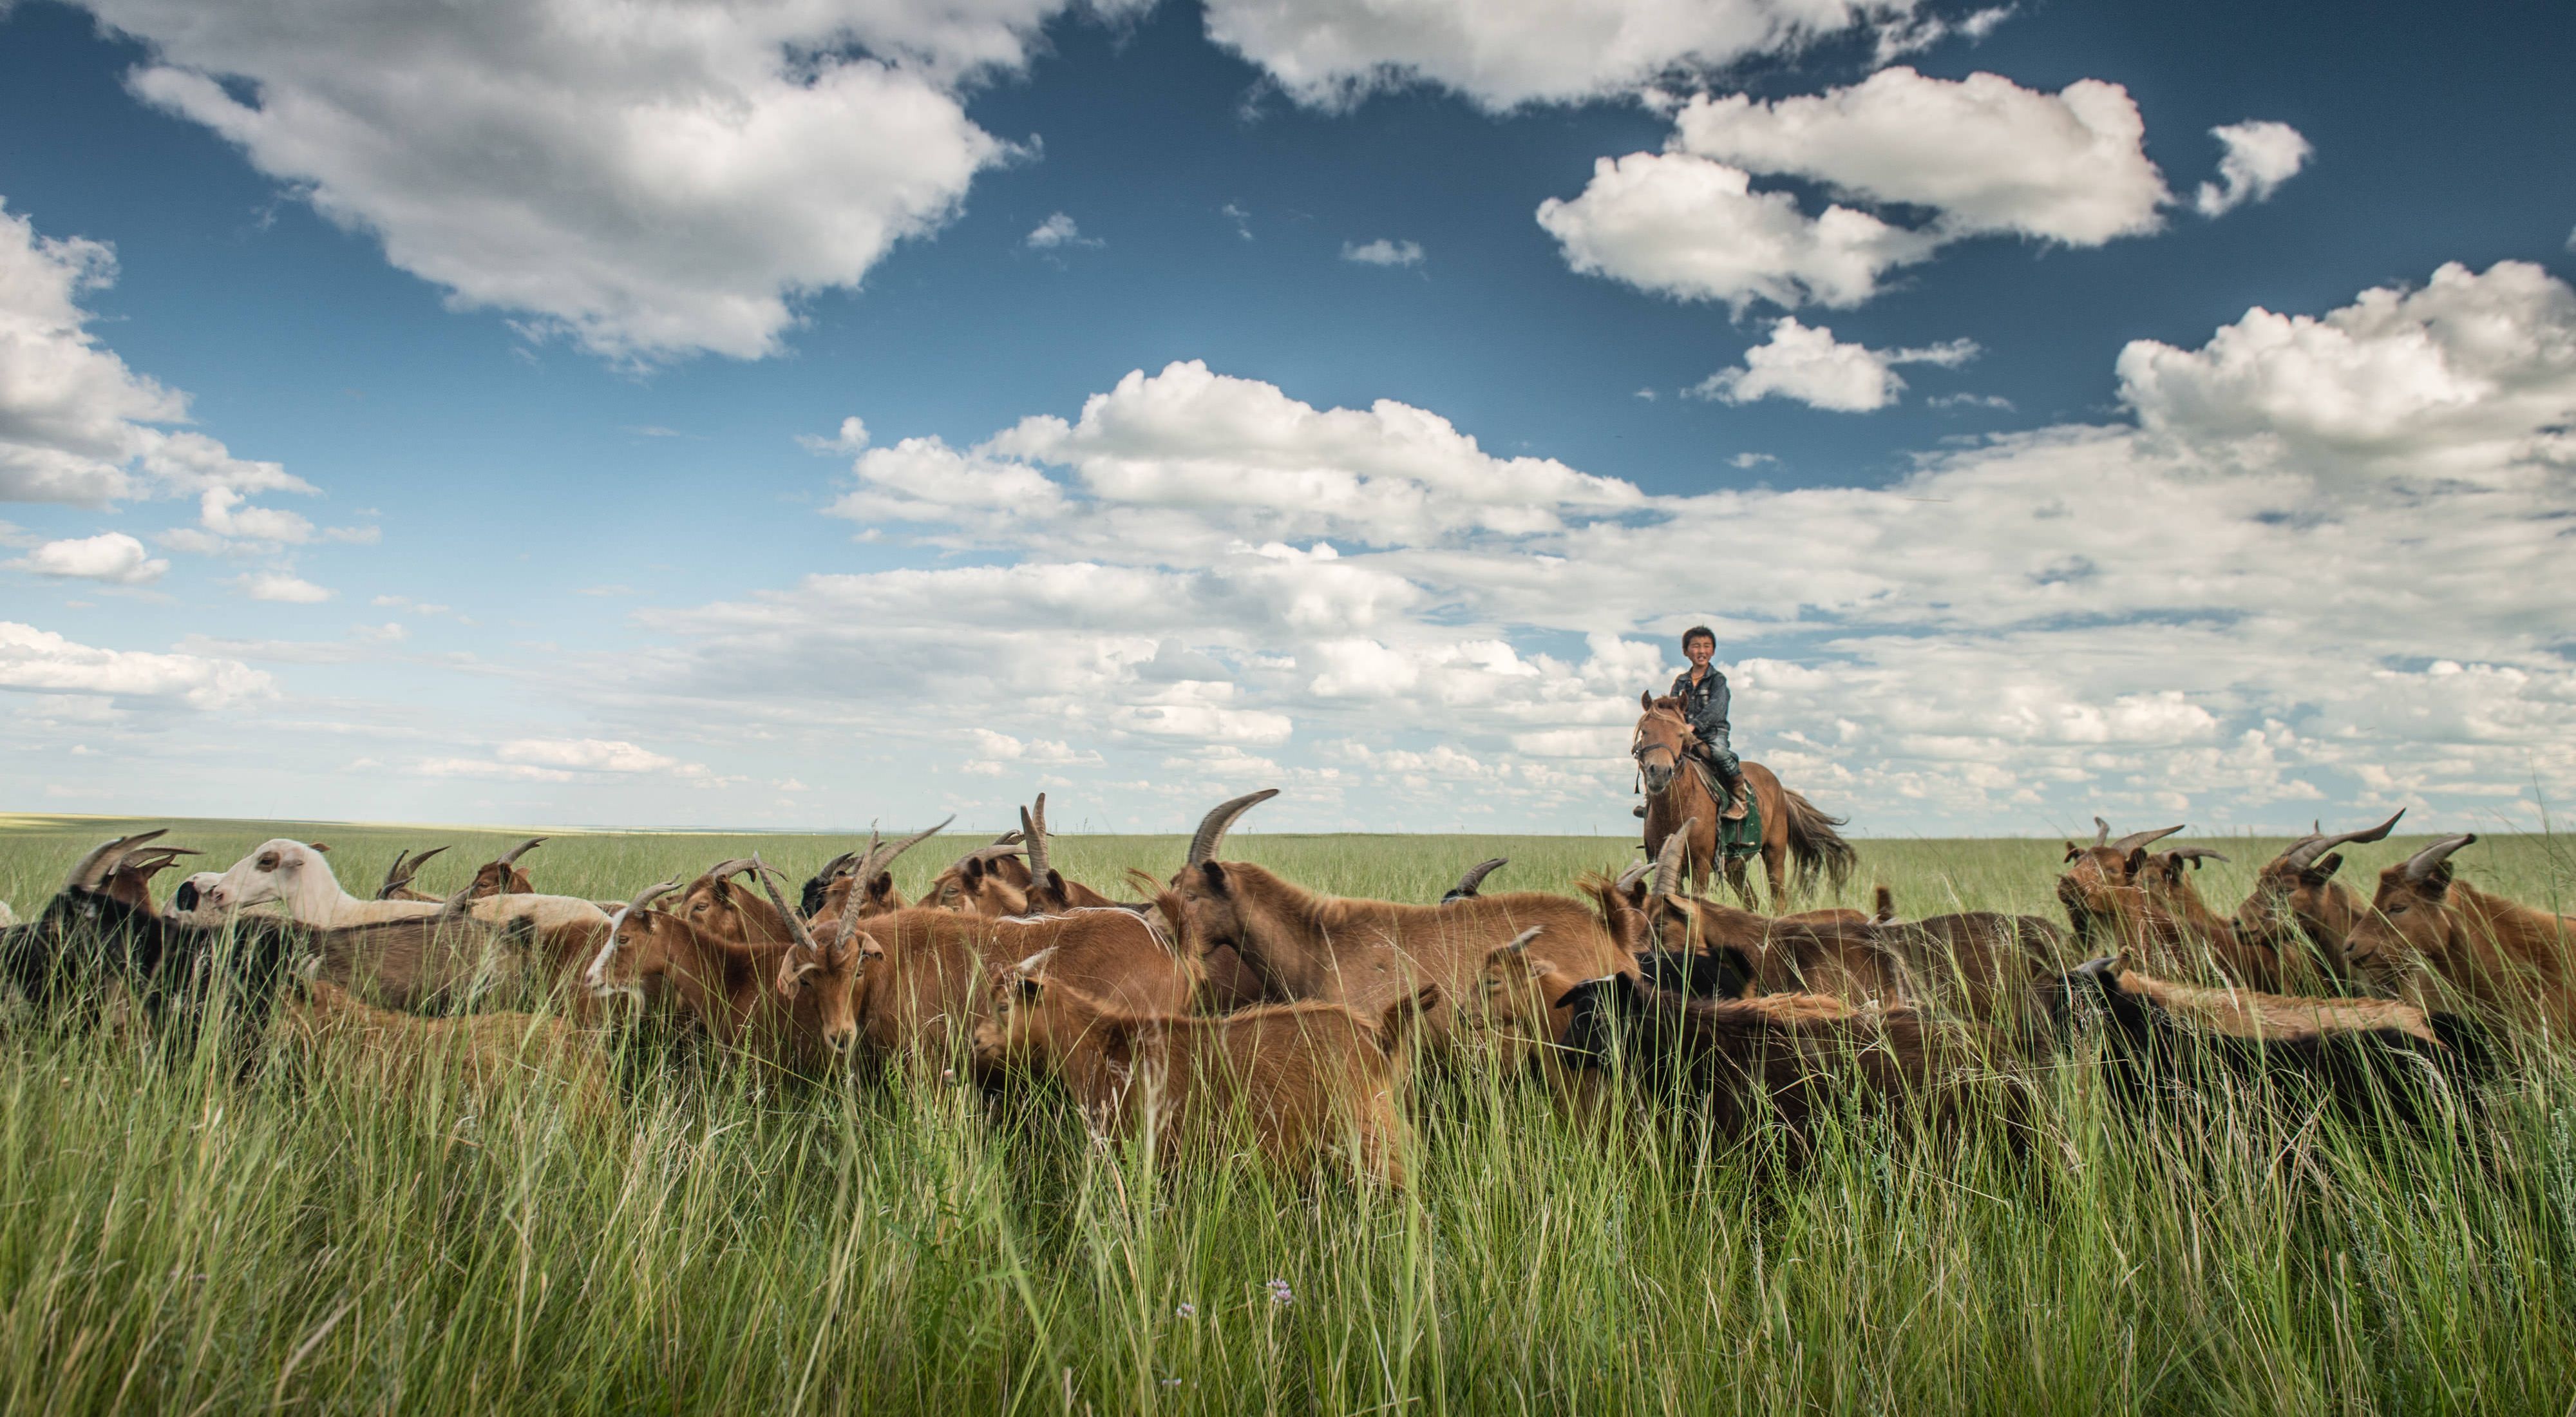 on horseback minds his family's herd of goats in the grassland steppe of eastern Mongolia's Toson Hulstai Nature Reserve.